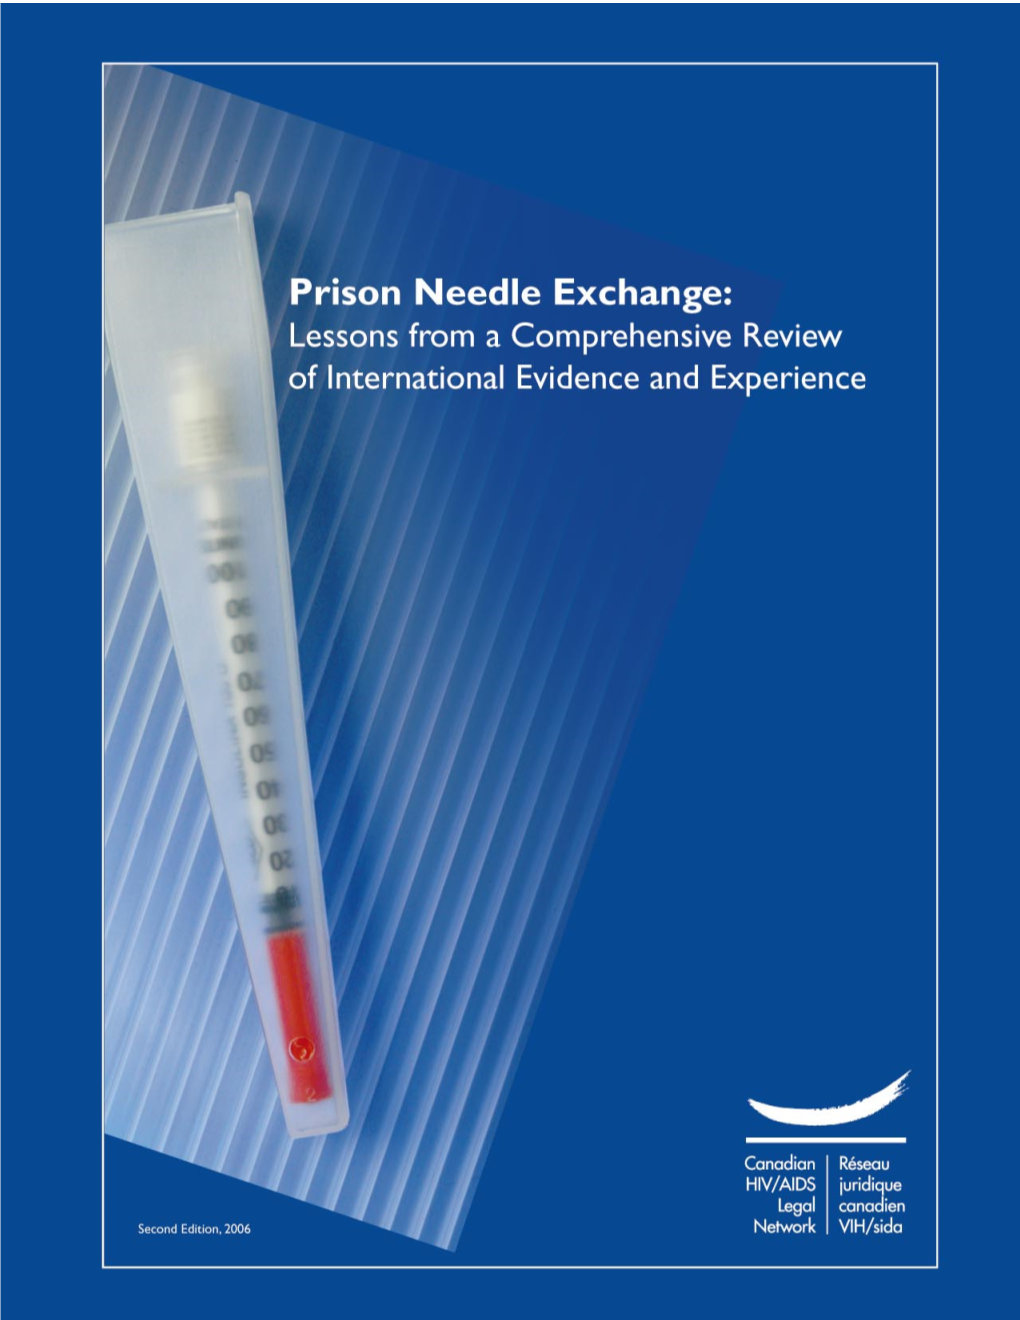 Prison Needle Exchange: Lessons from a Comprehensive Review of International Evidence and Experience